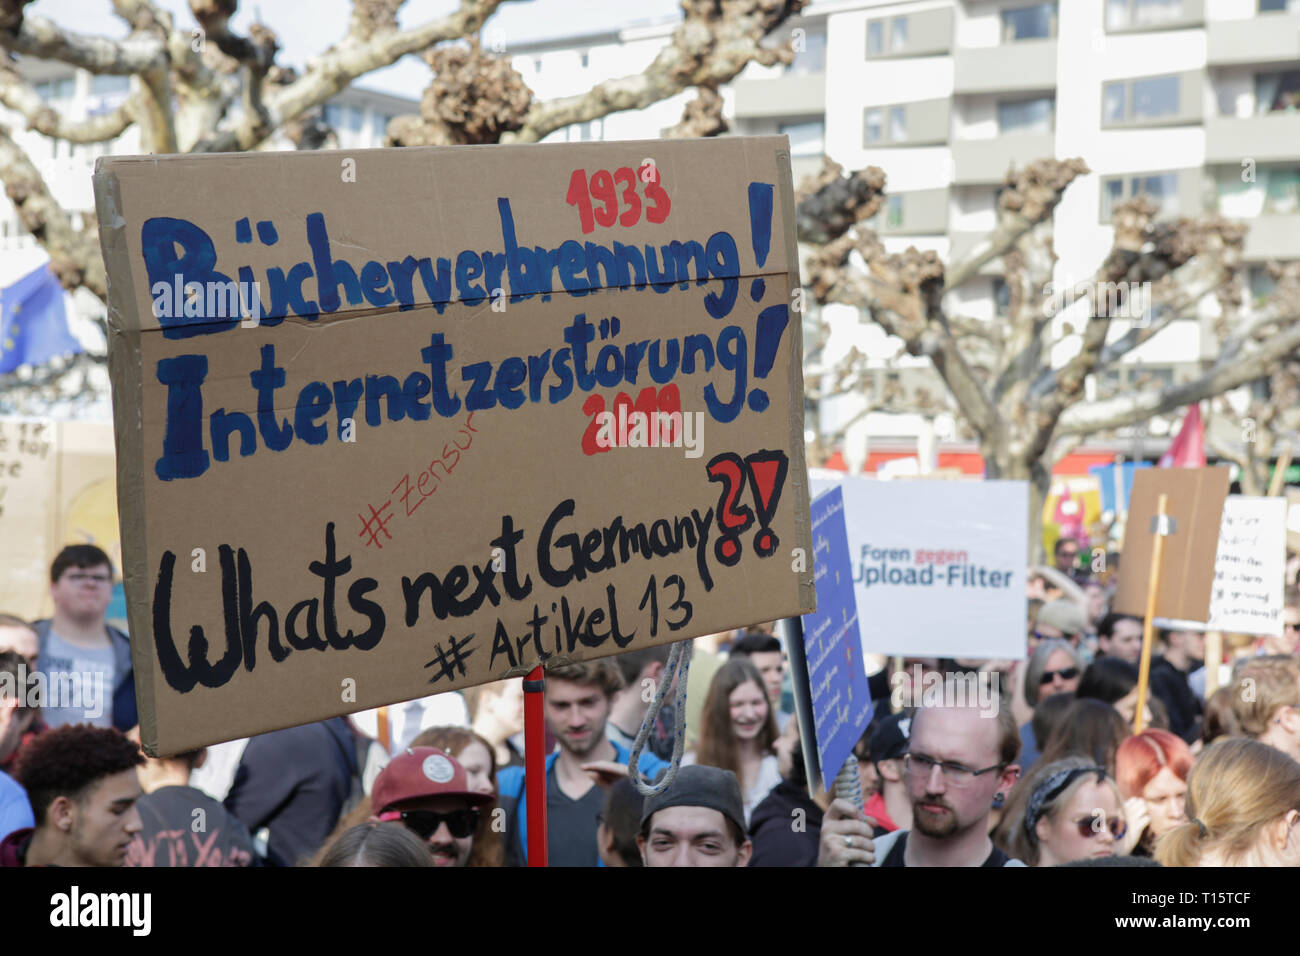 Frankfurt, Germany. 23rd March 2019. A protester holds up a sign that reads '1933 Book burning - 2019 Destruction of the Internet - What's next Germany?!'. More than 15,000 protesters marched through Frankfurt calling for the Internet to remain free and to not to pass the new EU Copyright Directive into law. The protest was part of a Germany wide day of protest against the EU directive. Stock Photo